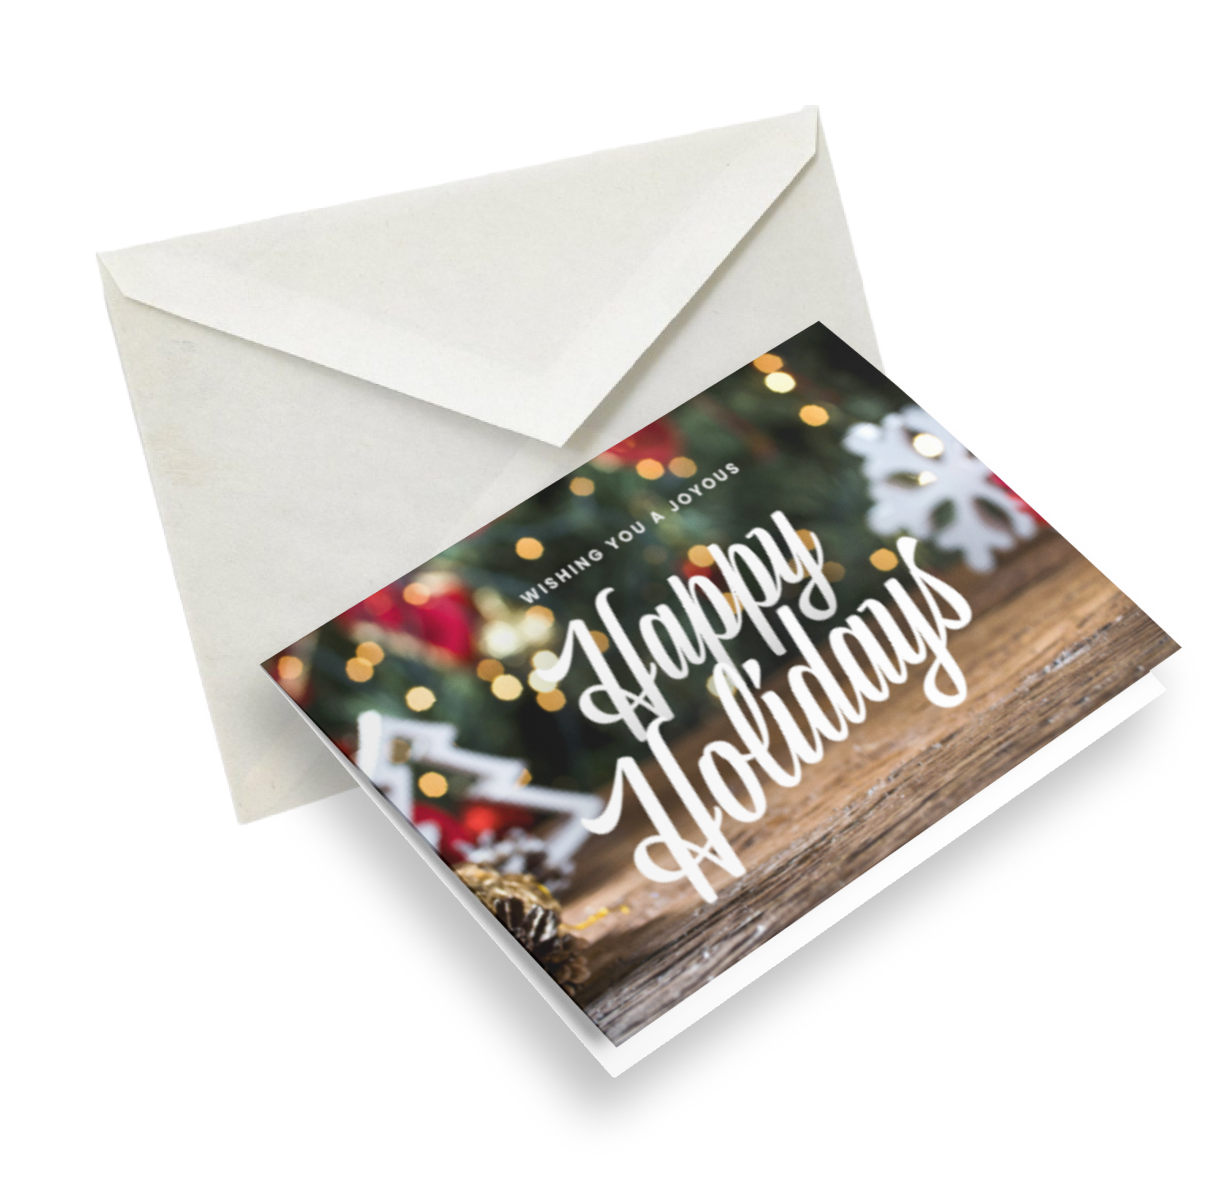 Predesigned Greeting Cards
